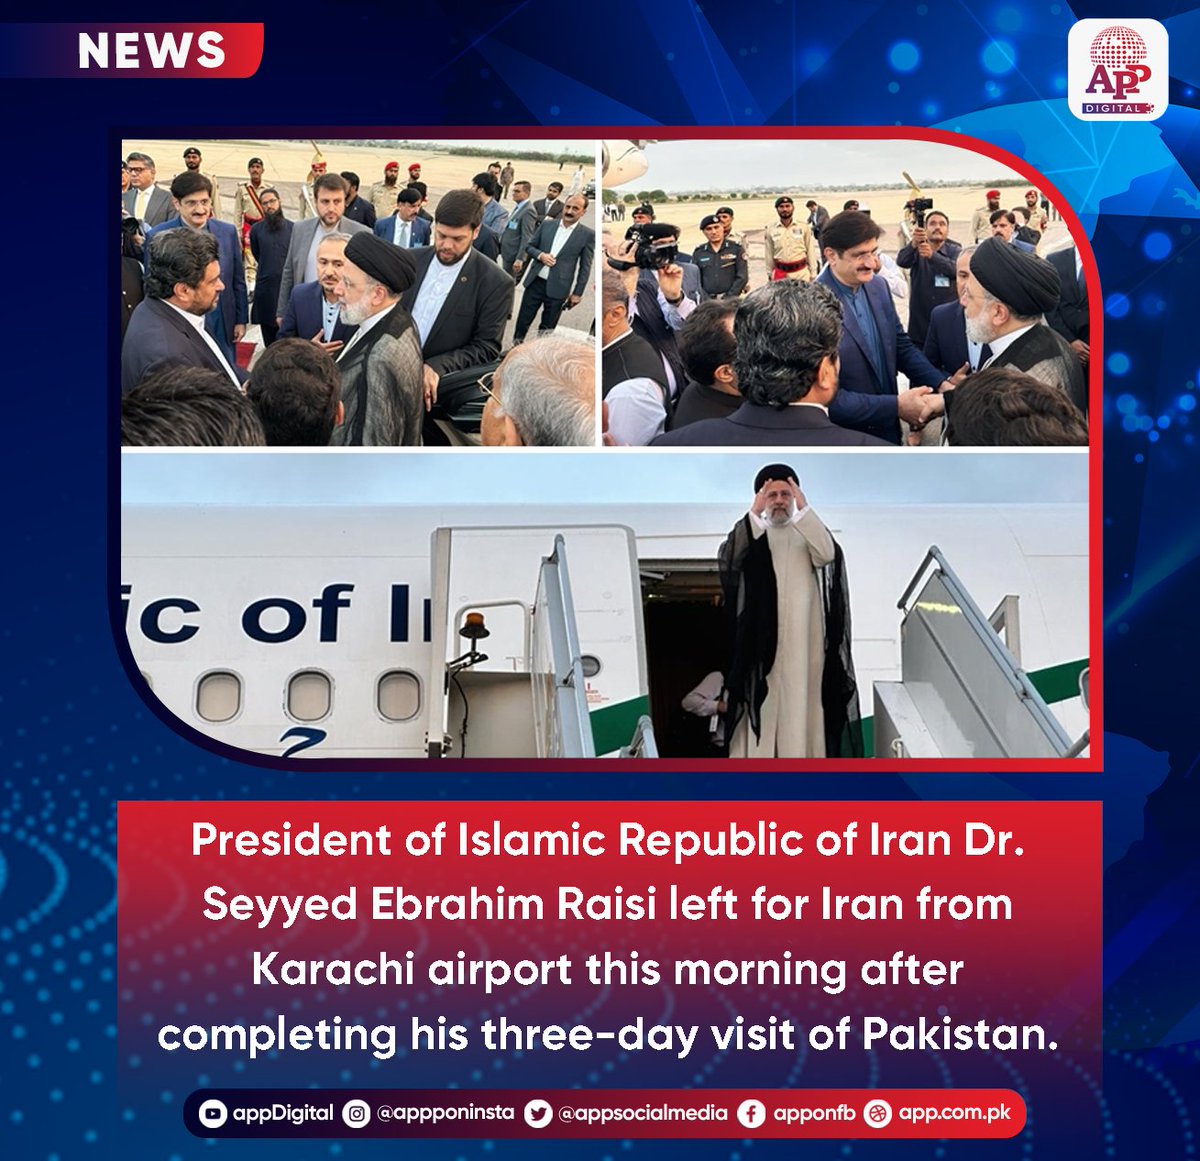 President of Iran Dr. Seyyed Ebrahim Raisi left for Iran from Karachi airport this morning after completing his three-day visit of Pakistan. #Pakistan #Iran #Karachi @ForignOffice @PakinIran @IRIMFA_EN